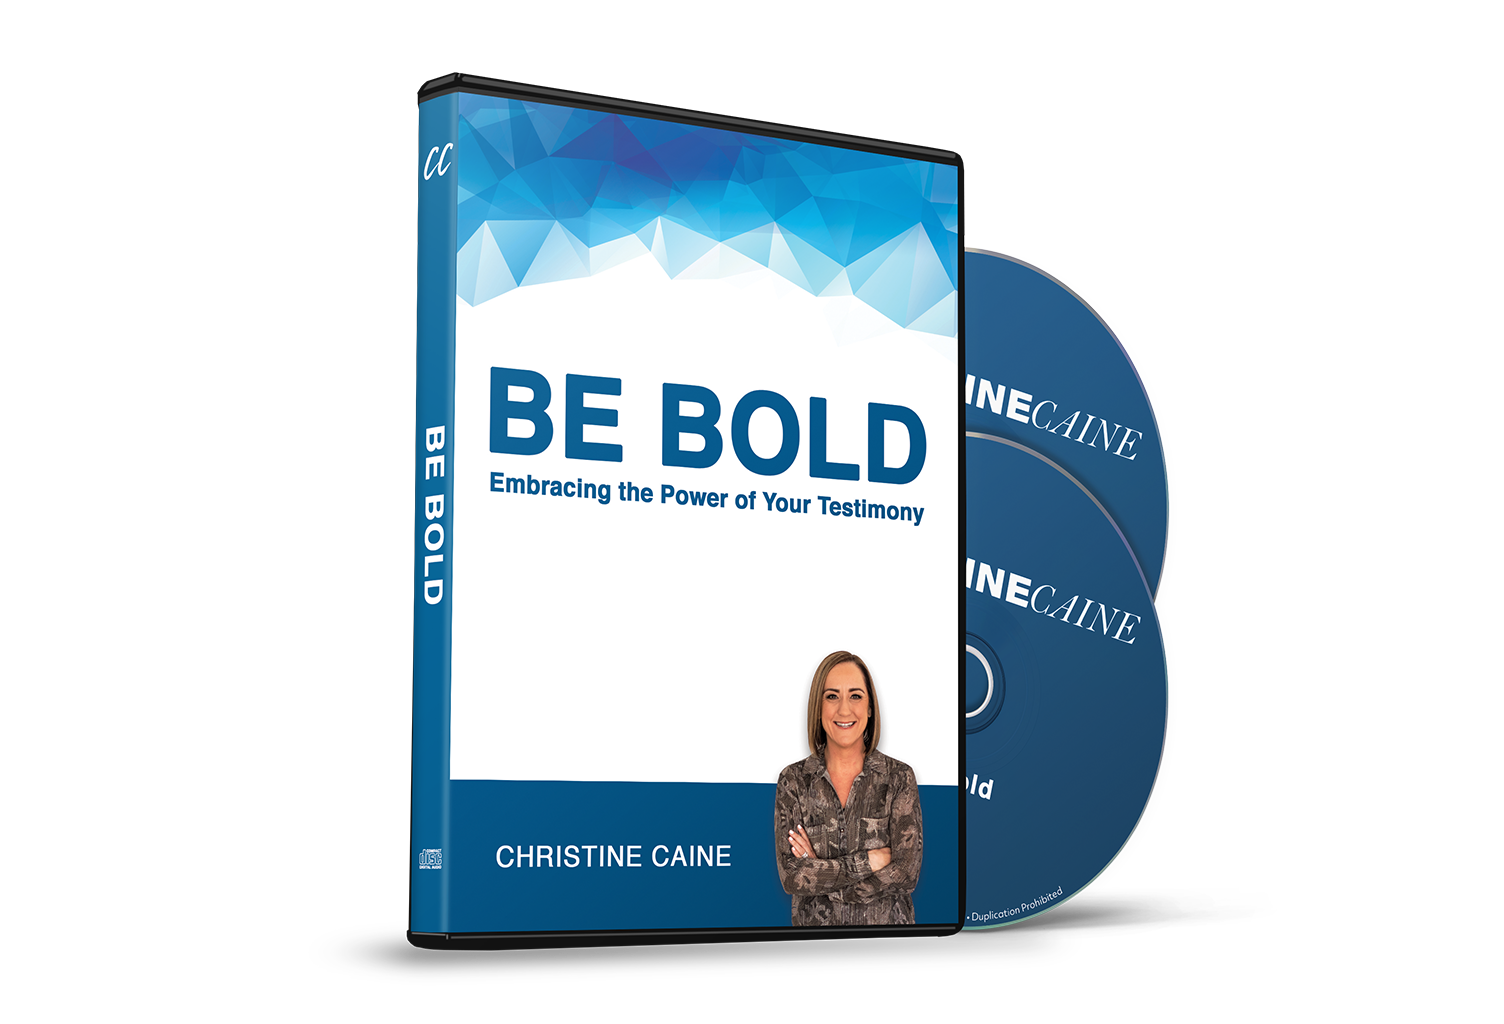 Be Bold by Christine Caine on TBN